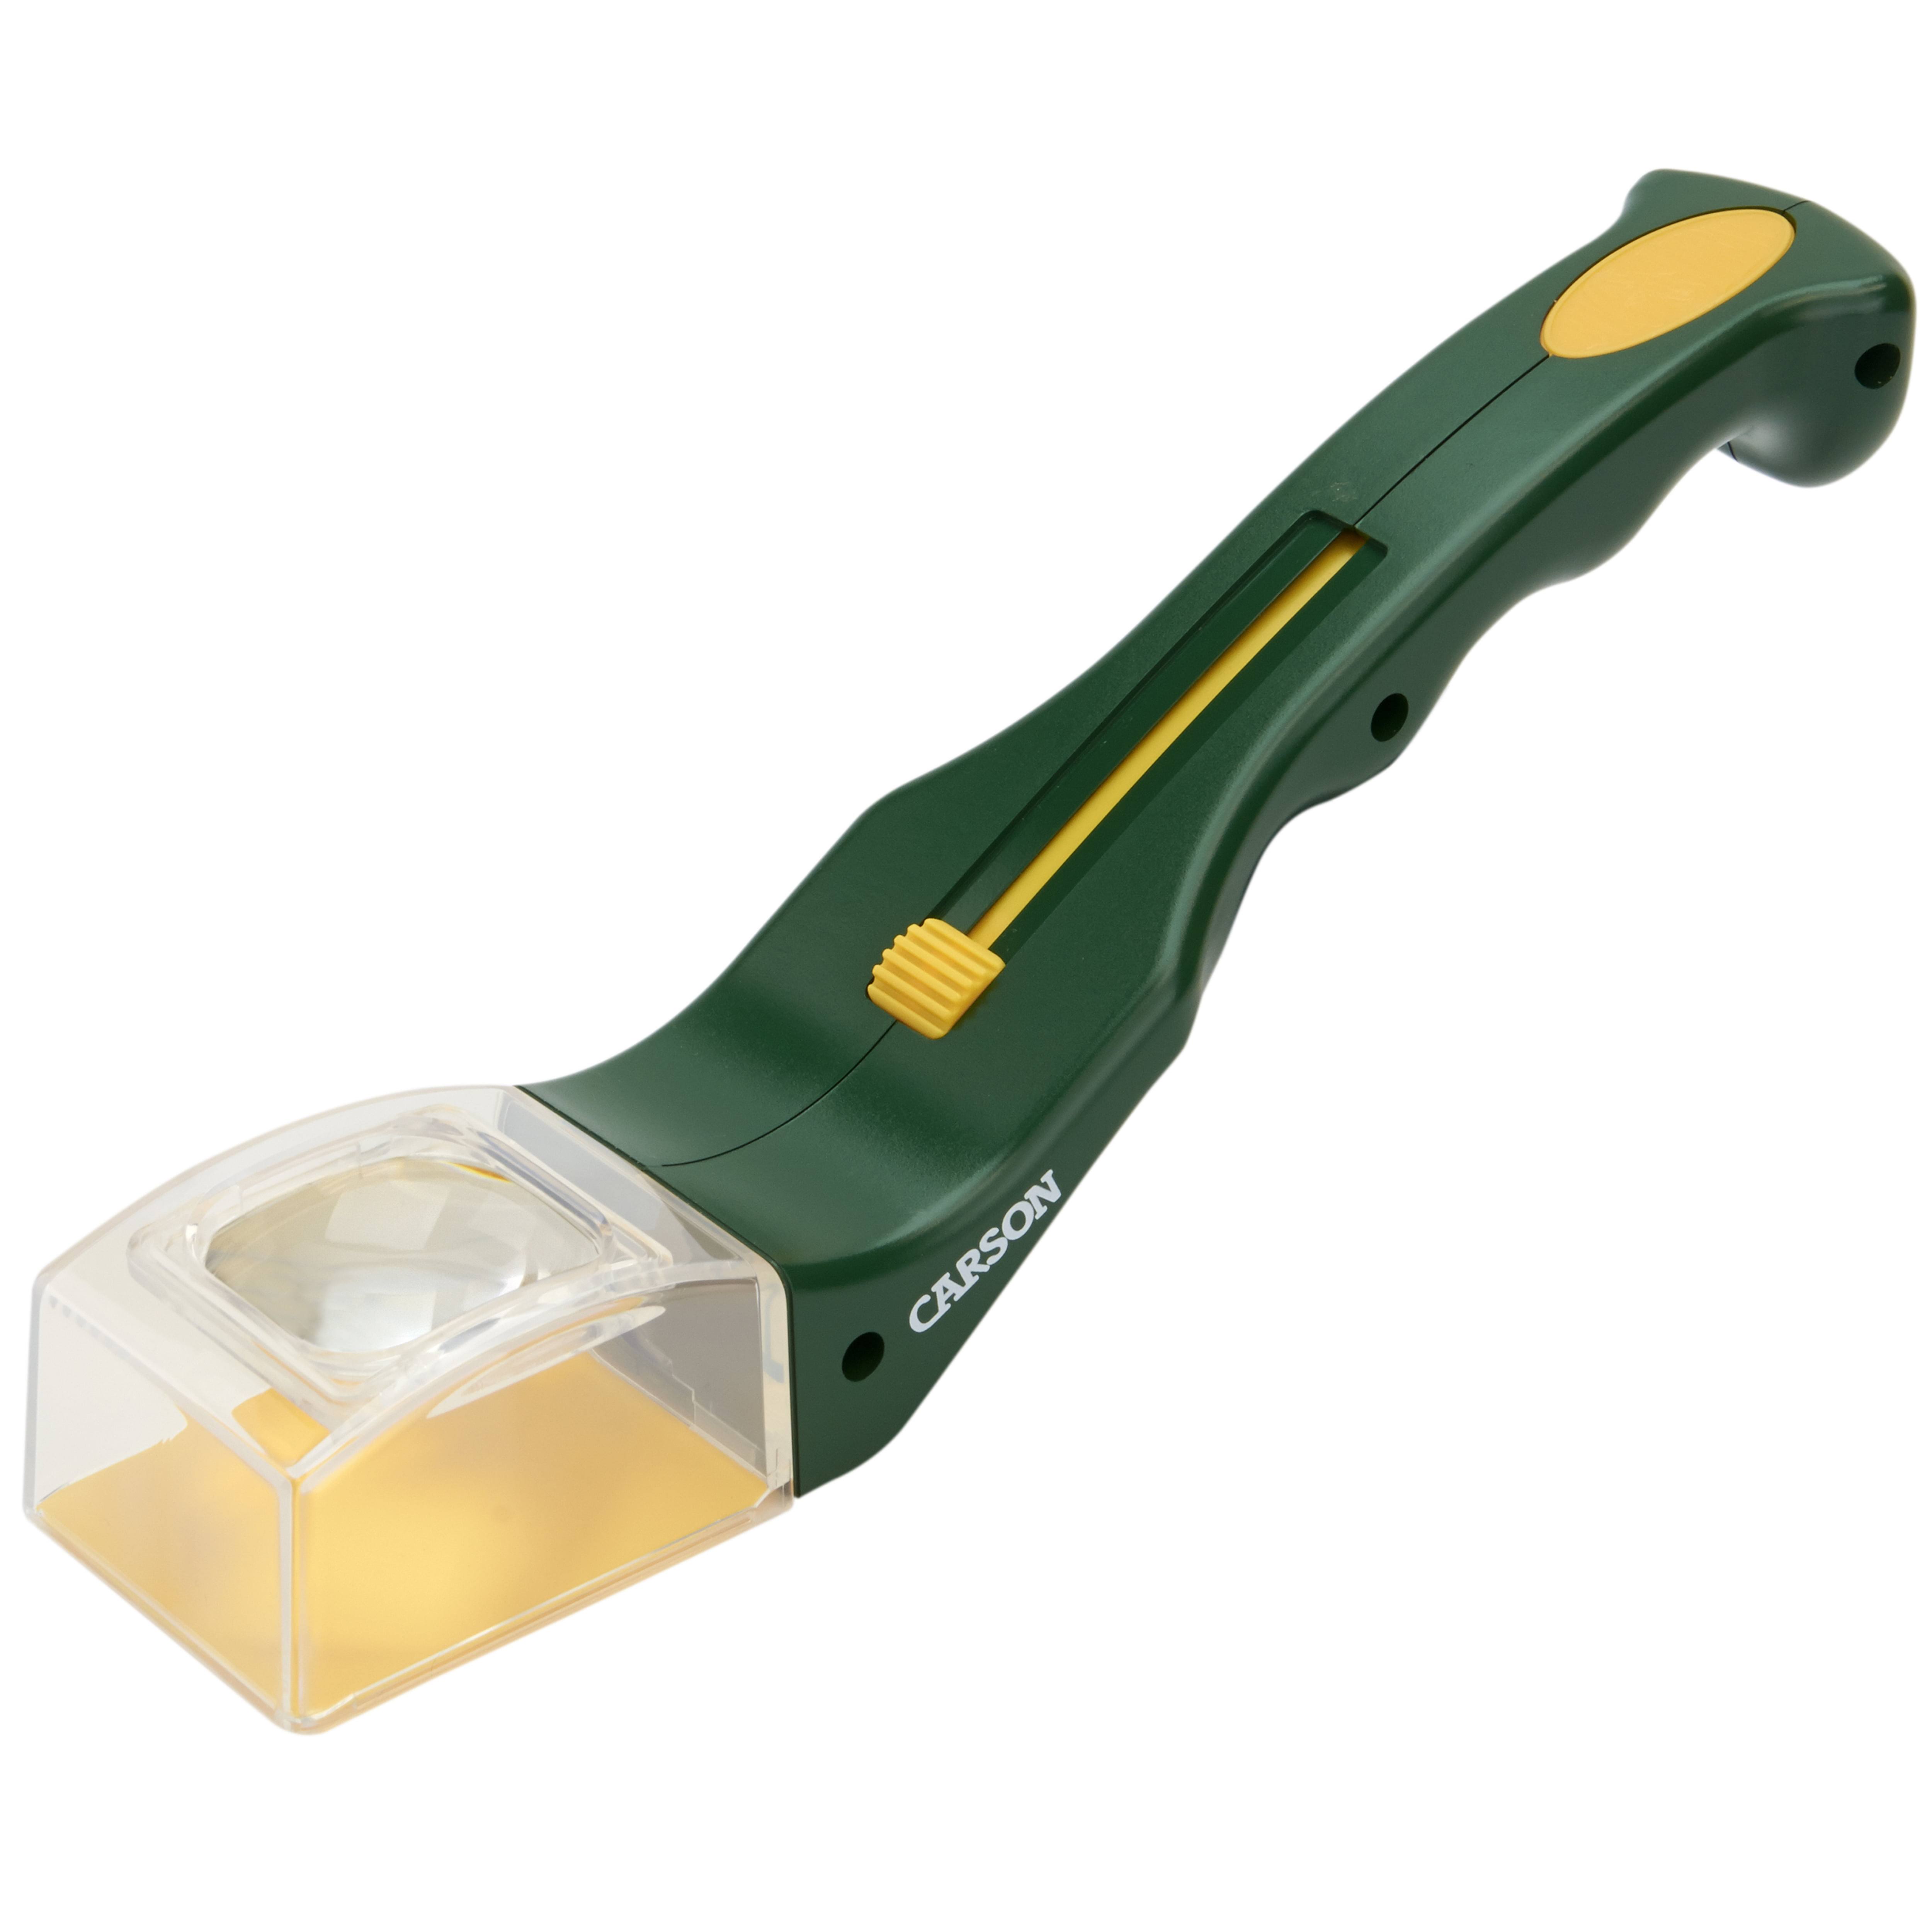 Carson BugView Bug Catching Tool and Magnifier